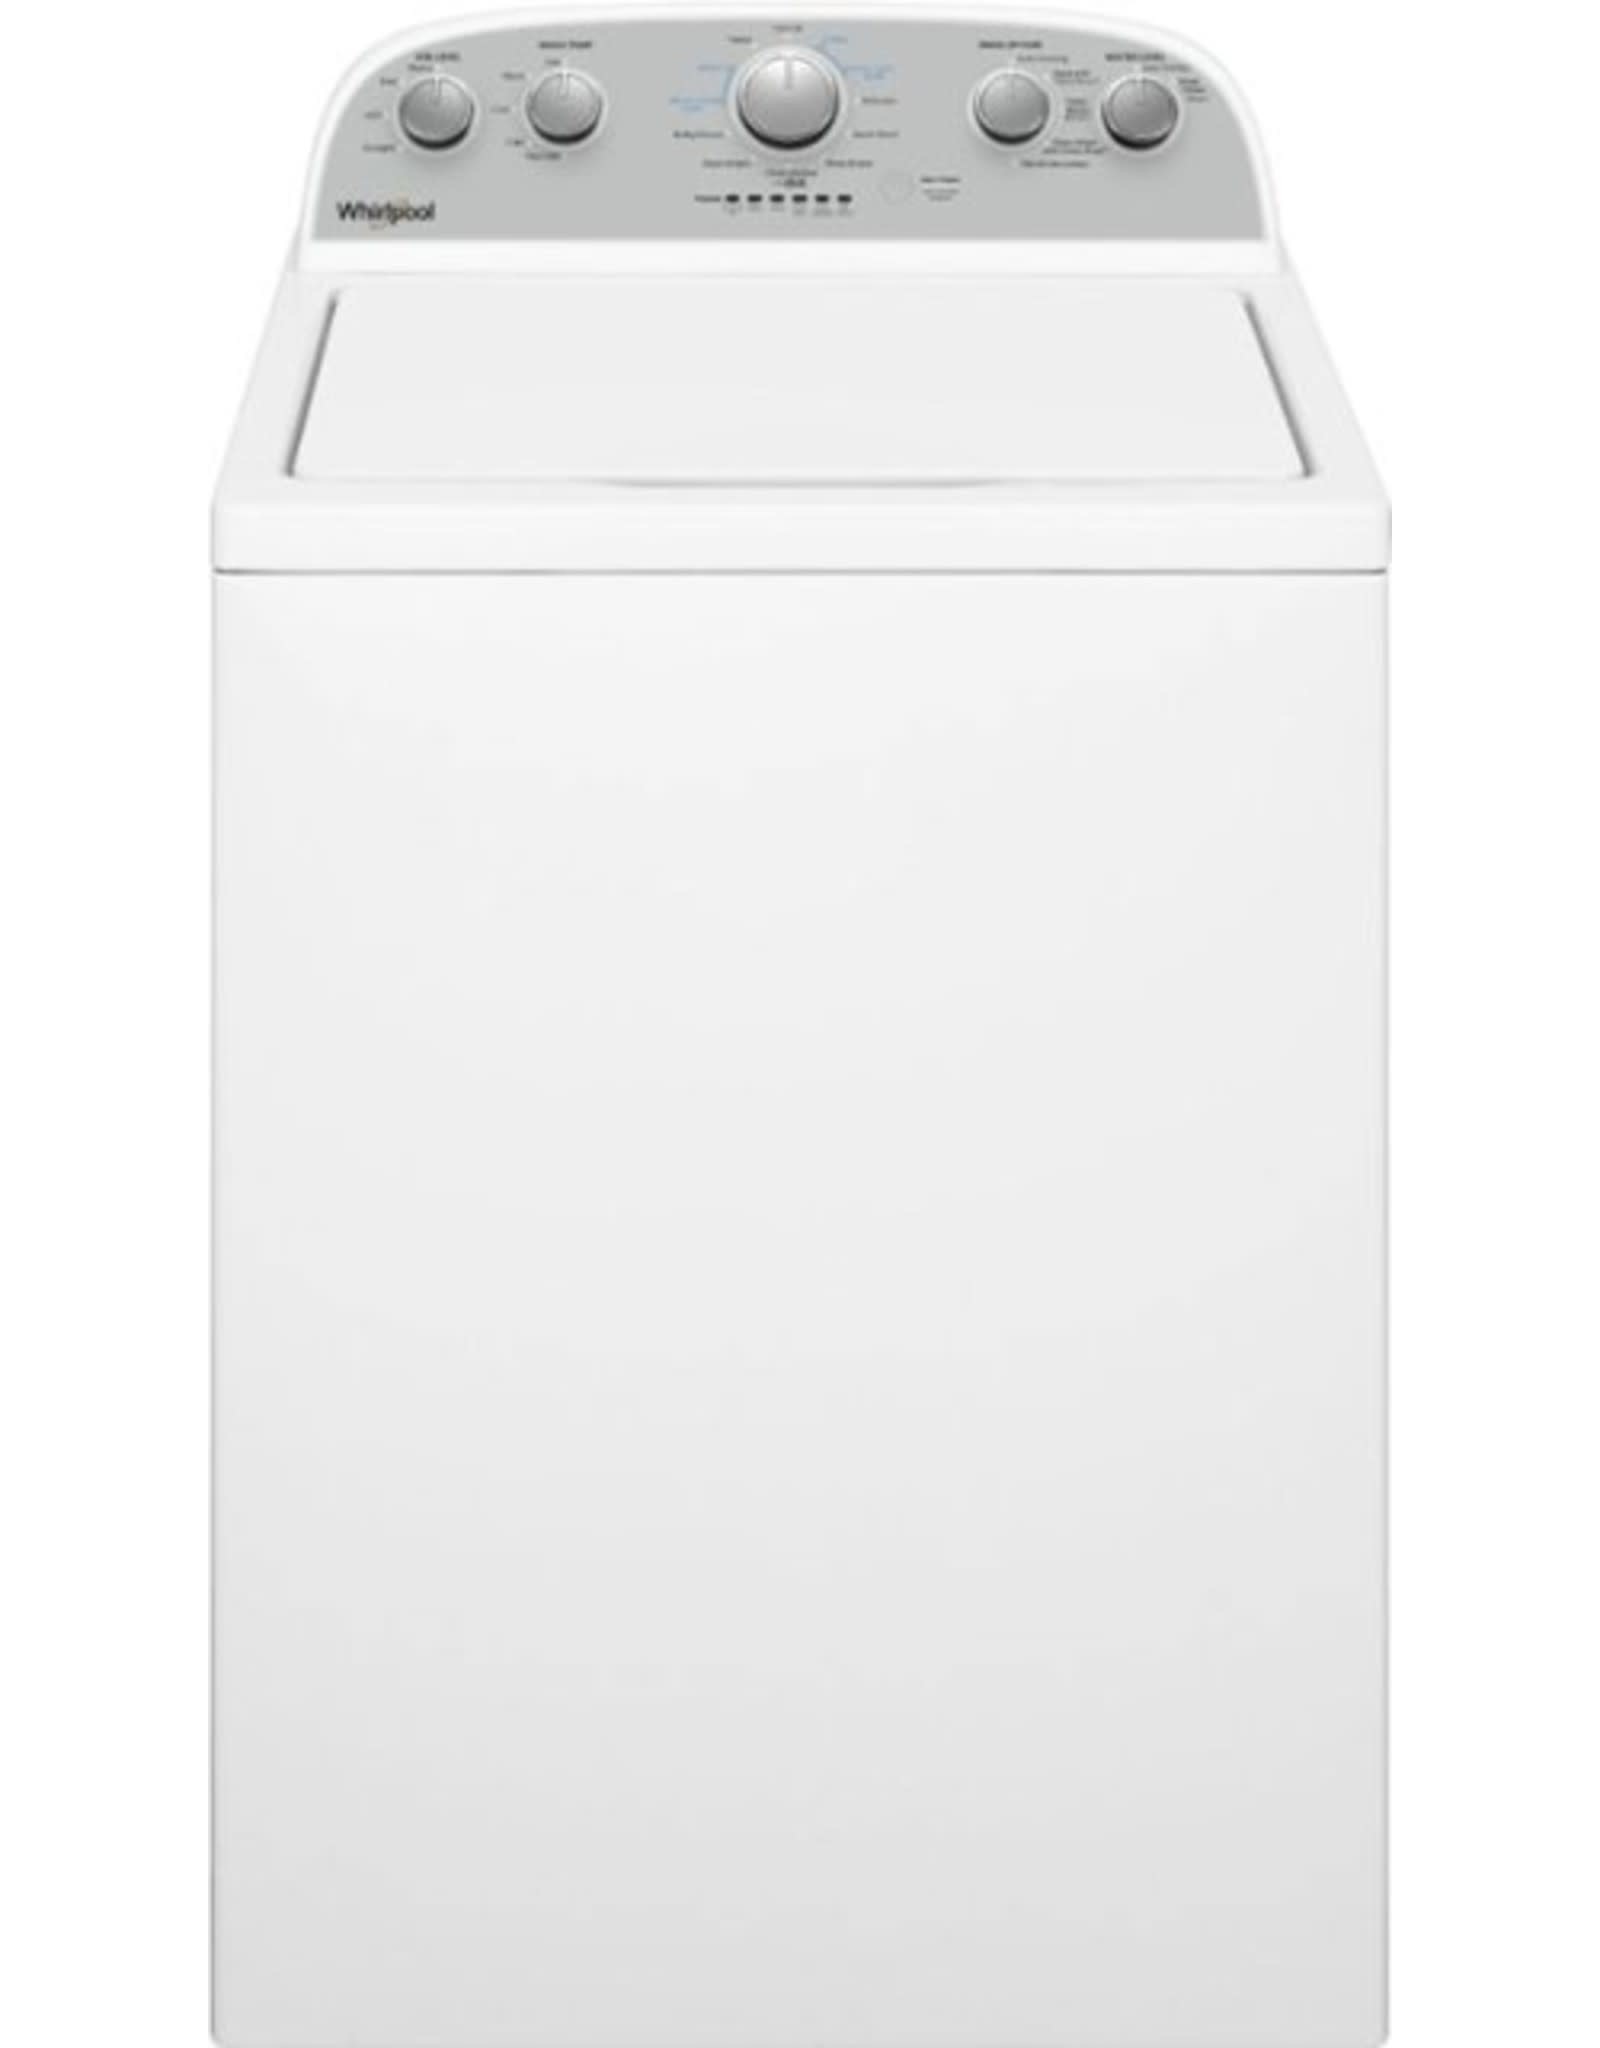 WHIRLPOOL WTW4816FW  3.5 cu. ft. WTW4816FWTop Load Washer with the Deep Water Wash Option